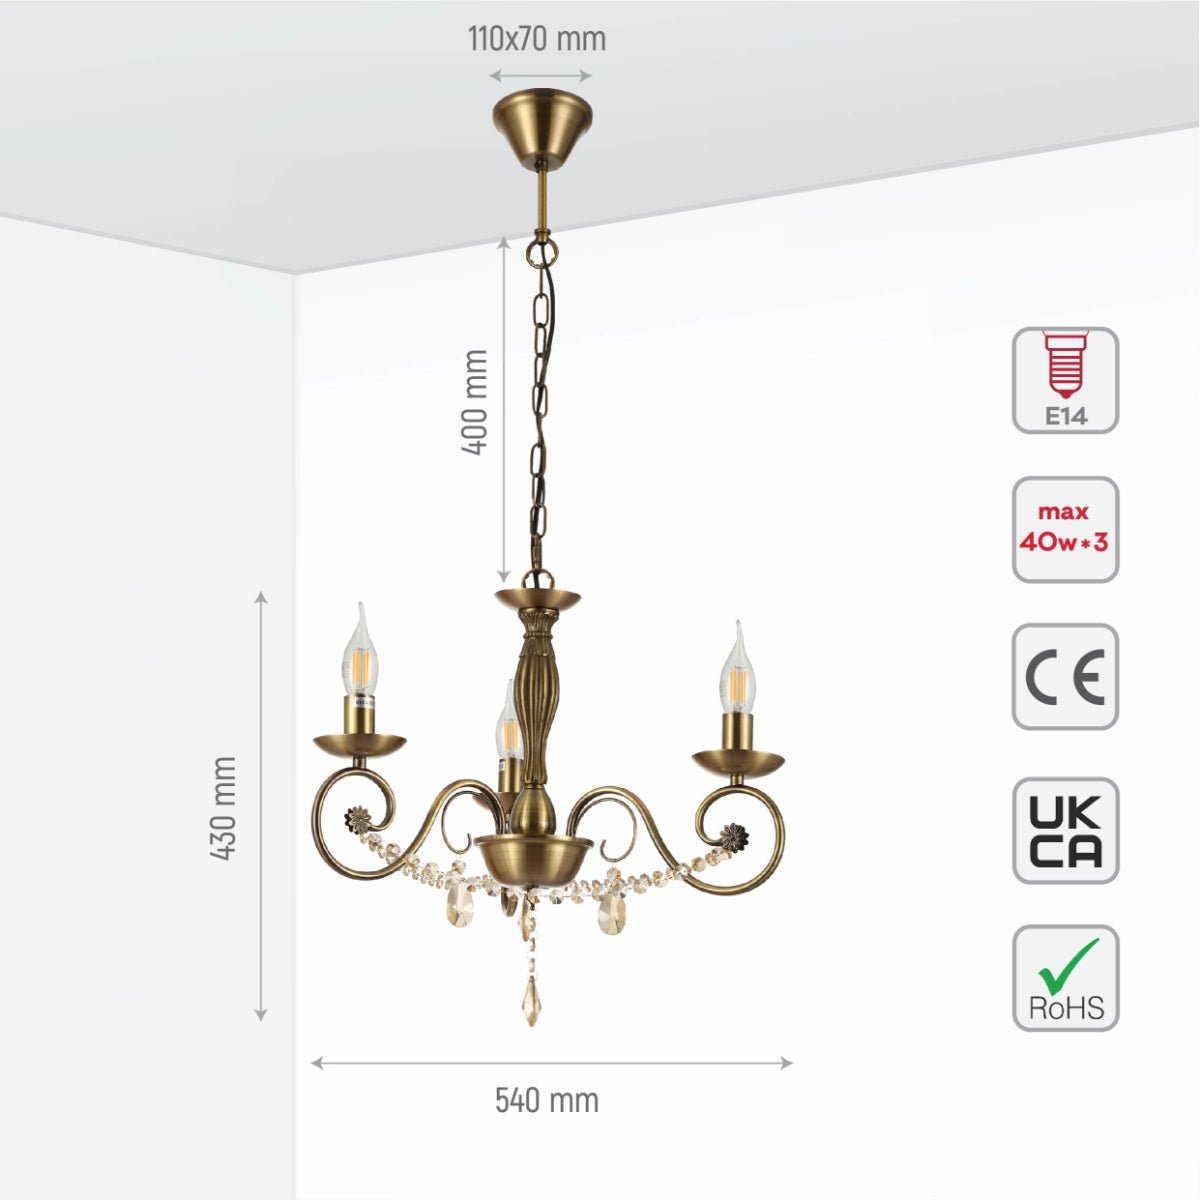 Size and specs of Antique Brass Finishing Metal Body French Candle Vintage Crystal Ceiling Light with E14 | TEKLED 152-179534